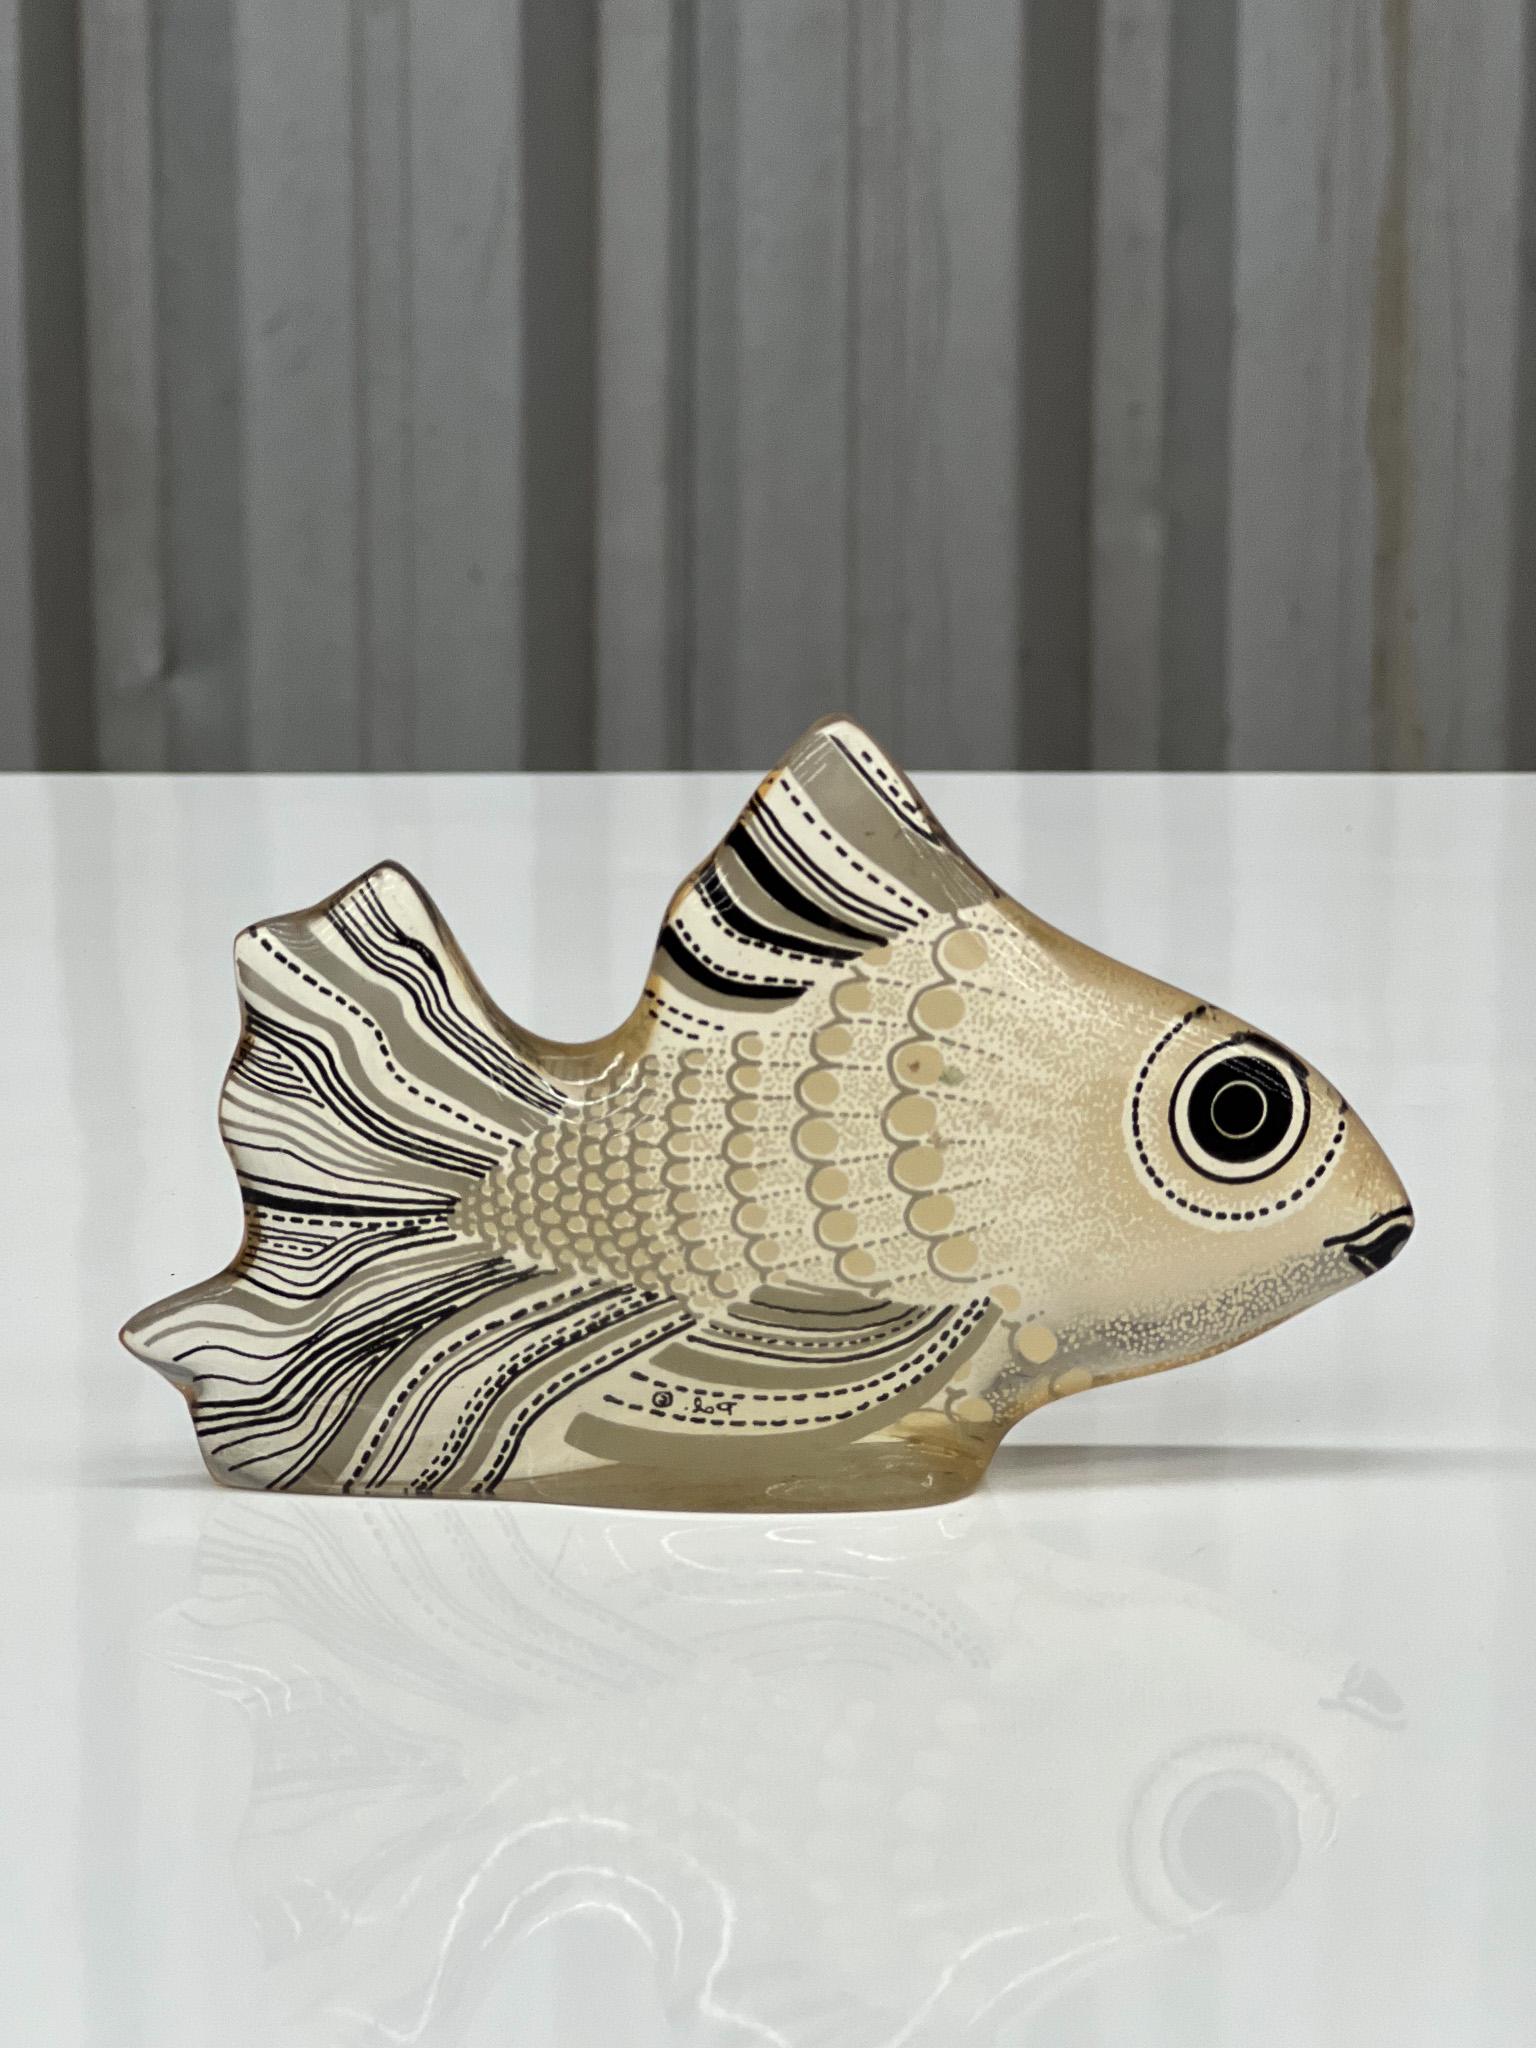 Mid-Century Modern Kinetic Sculpture of a Goldfish in Resin by Abraham Palatinik, 1960s For Sale